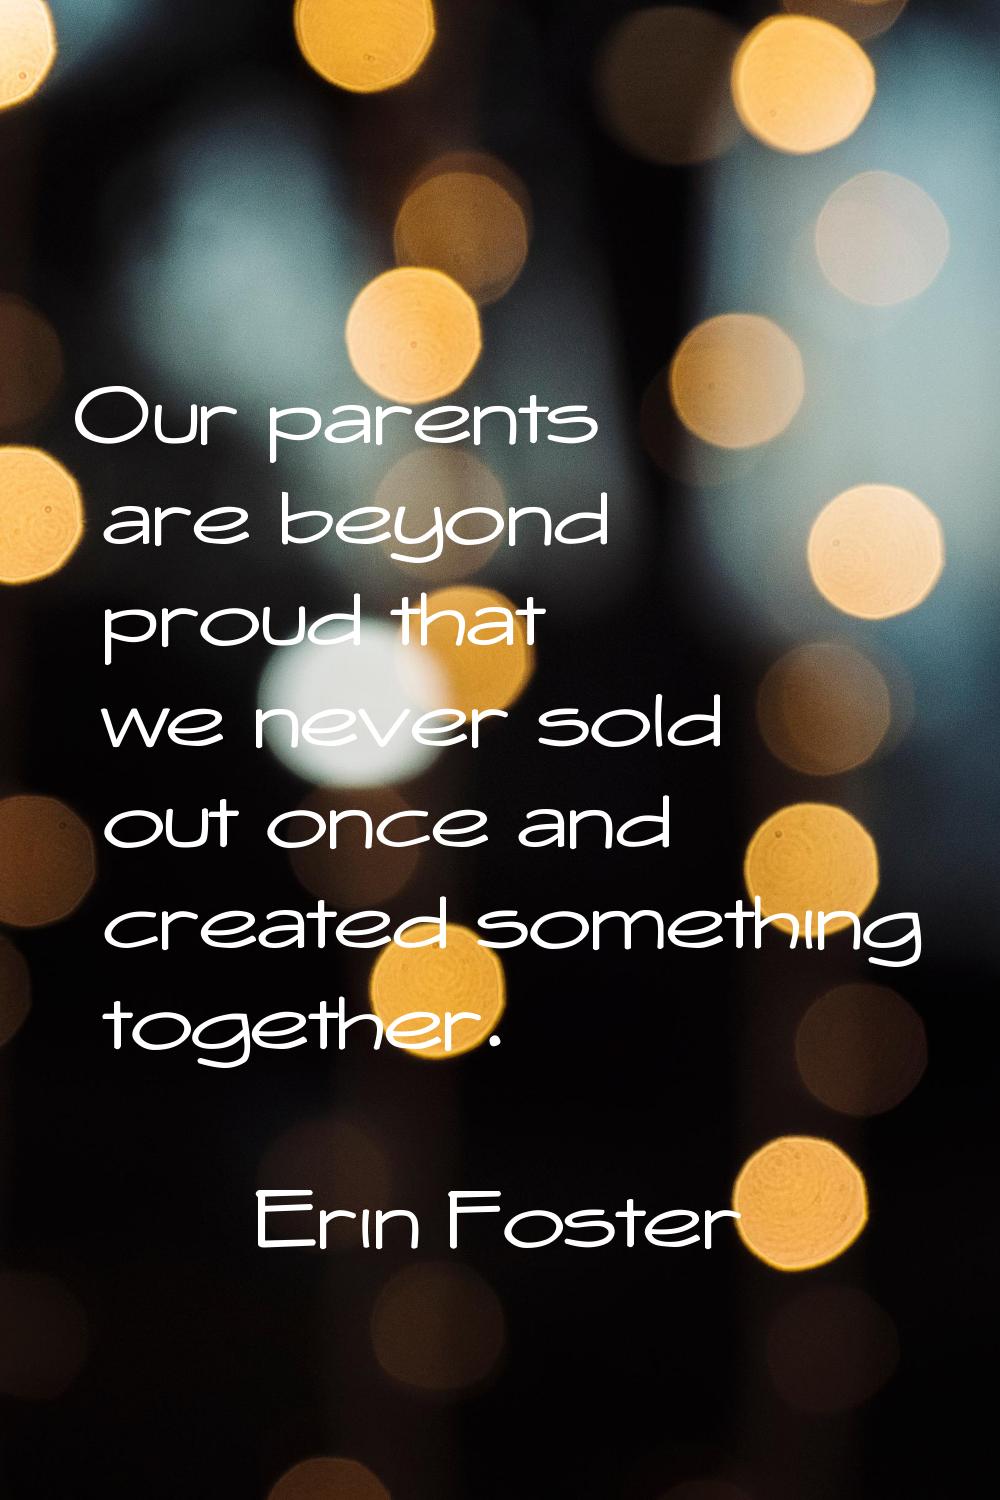 Our parents are beyond proud that we never sold out once and created something together.